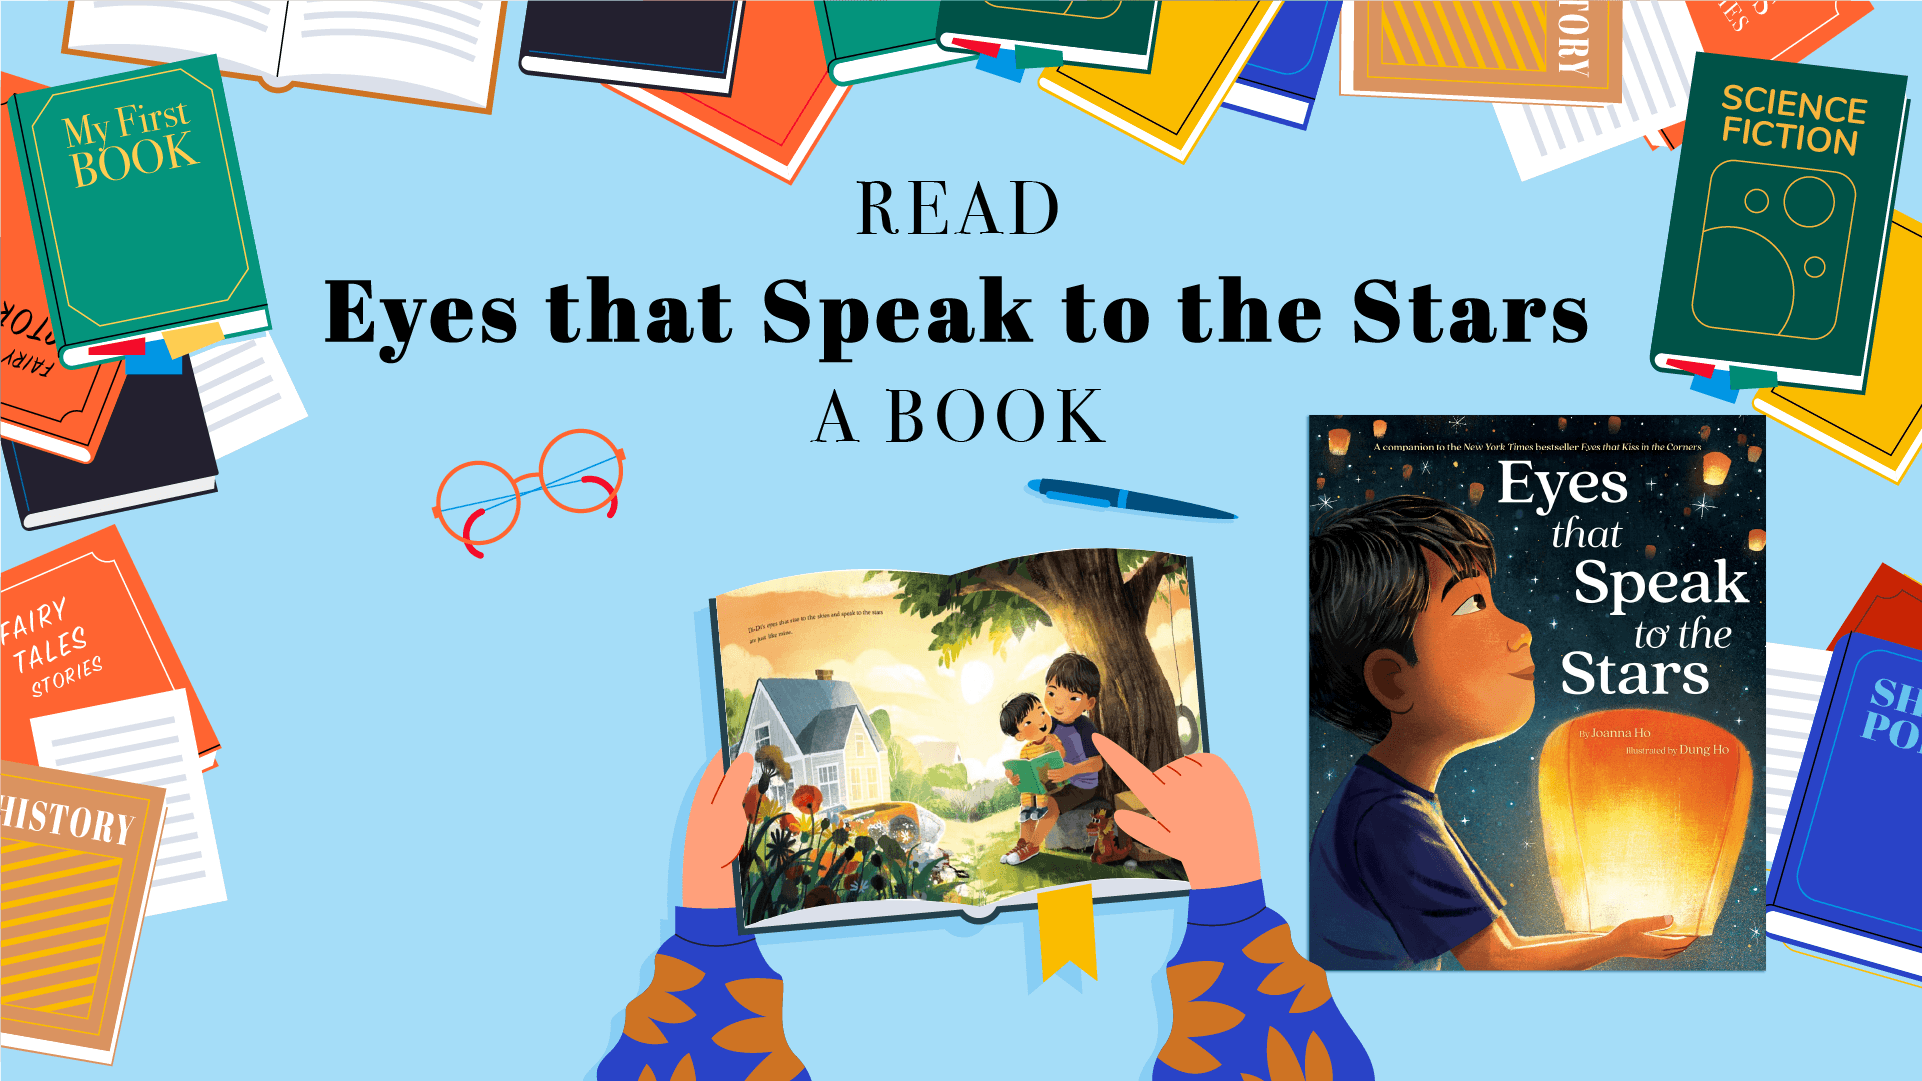 Books border, headline- first line: READ second line: "Eyes that Speak to the Stars" third line: A BOOK graphics of orange glasses, blue pen, a person opening a book and point at the two spread pages from "Eyes that Speak to the Stars". The cover of "Eyes that Speak to the Stars" on right side.